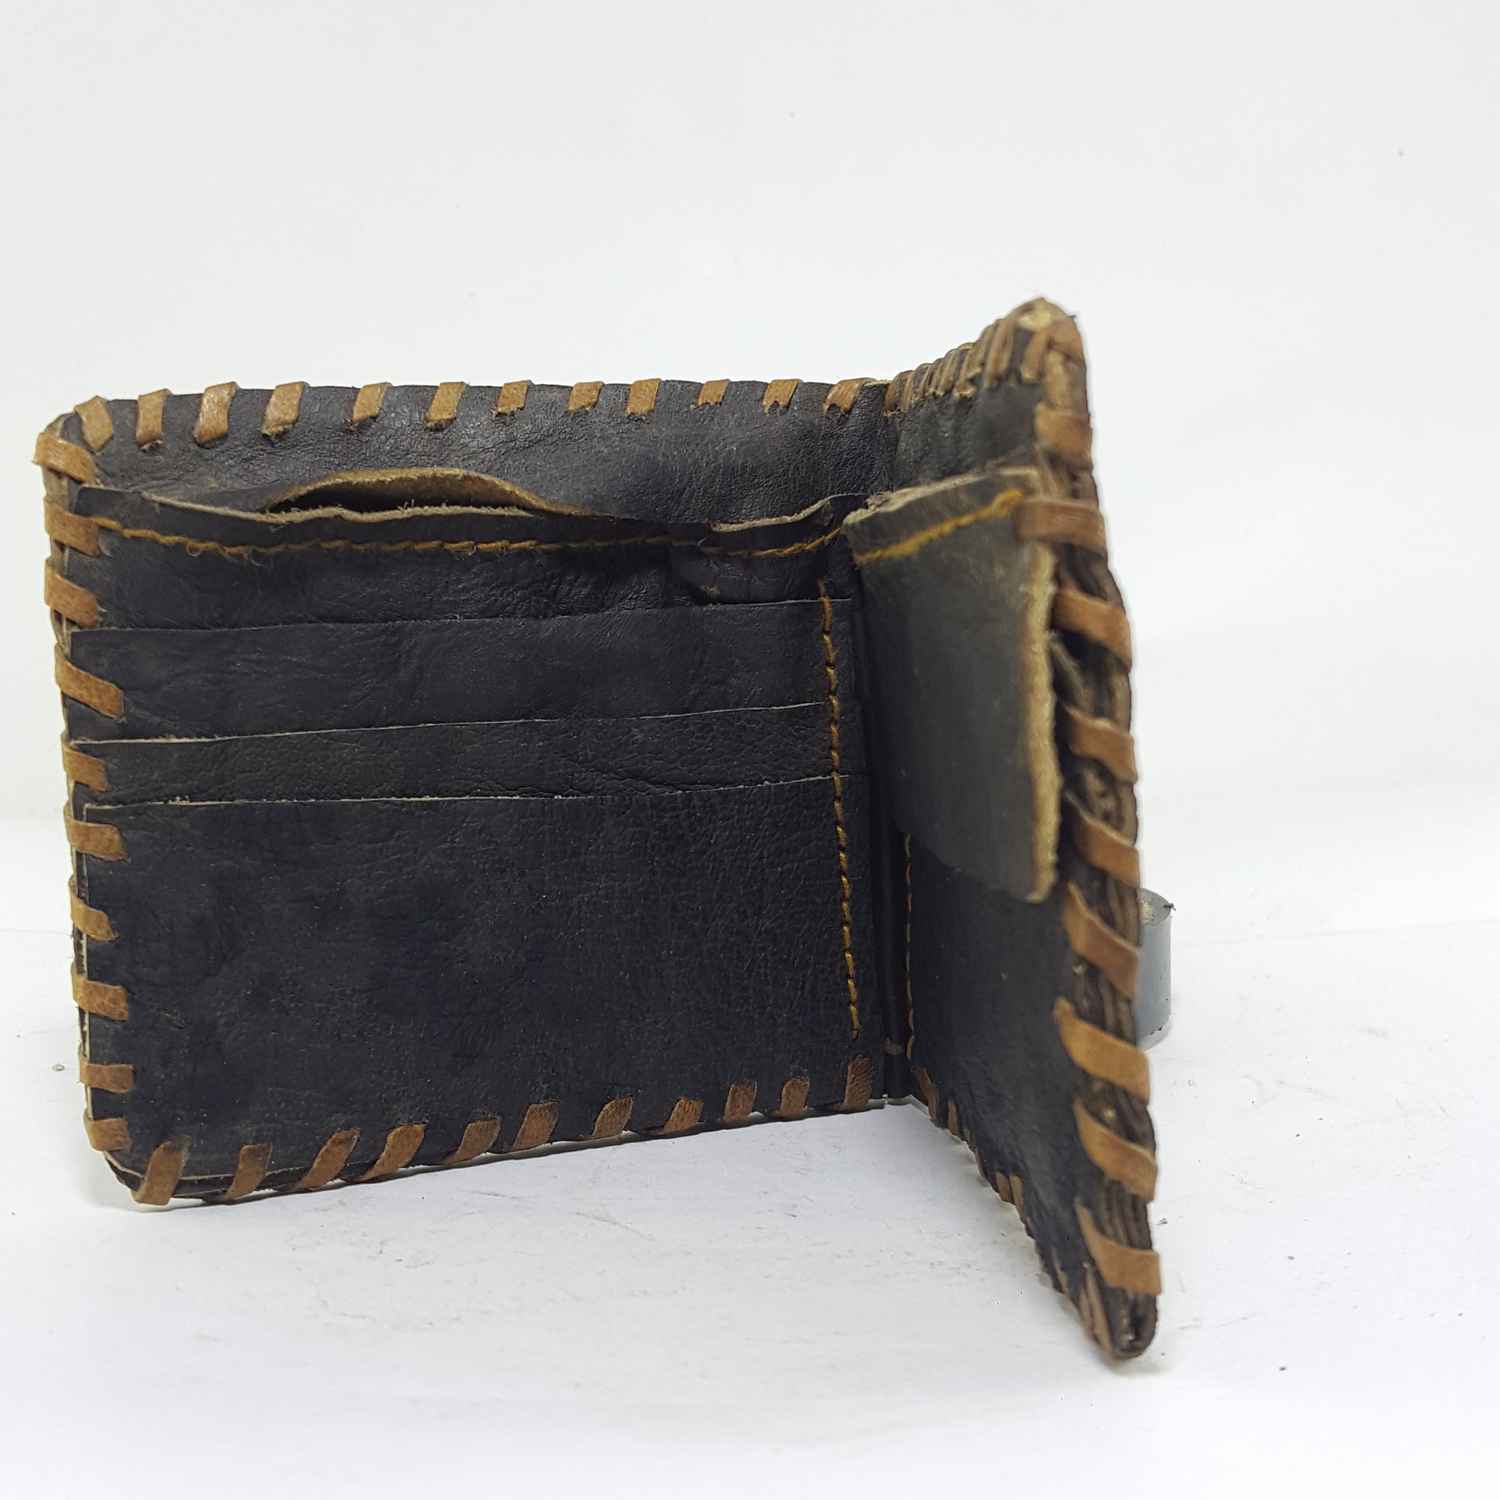 Pure Leather Handmade Wallet all Hand Stitched, 6 Pockets